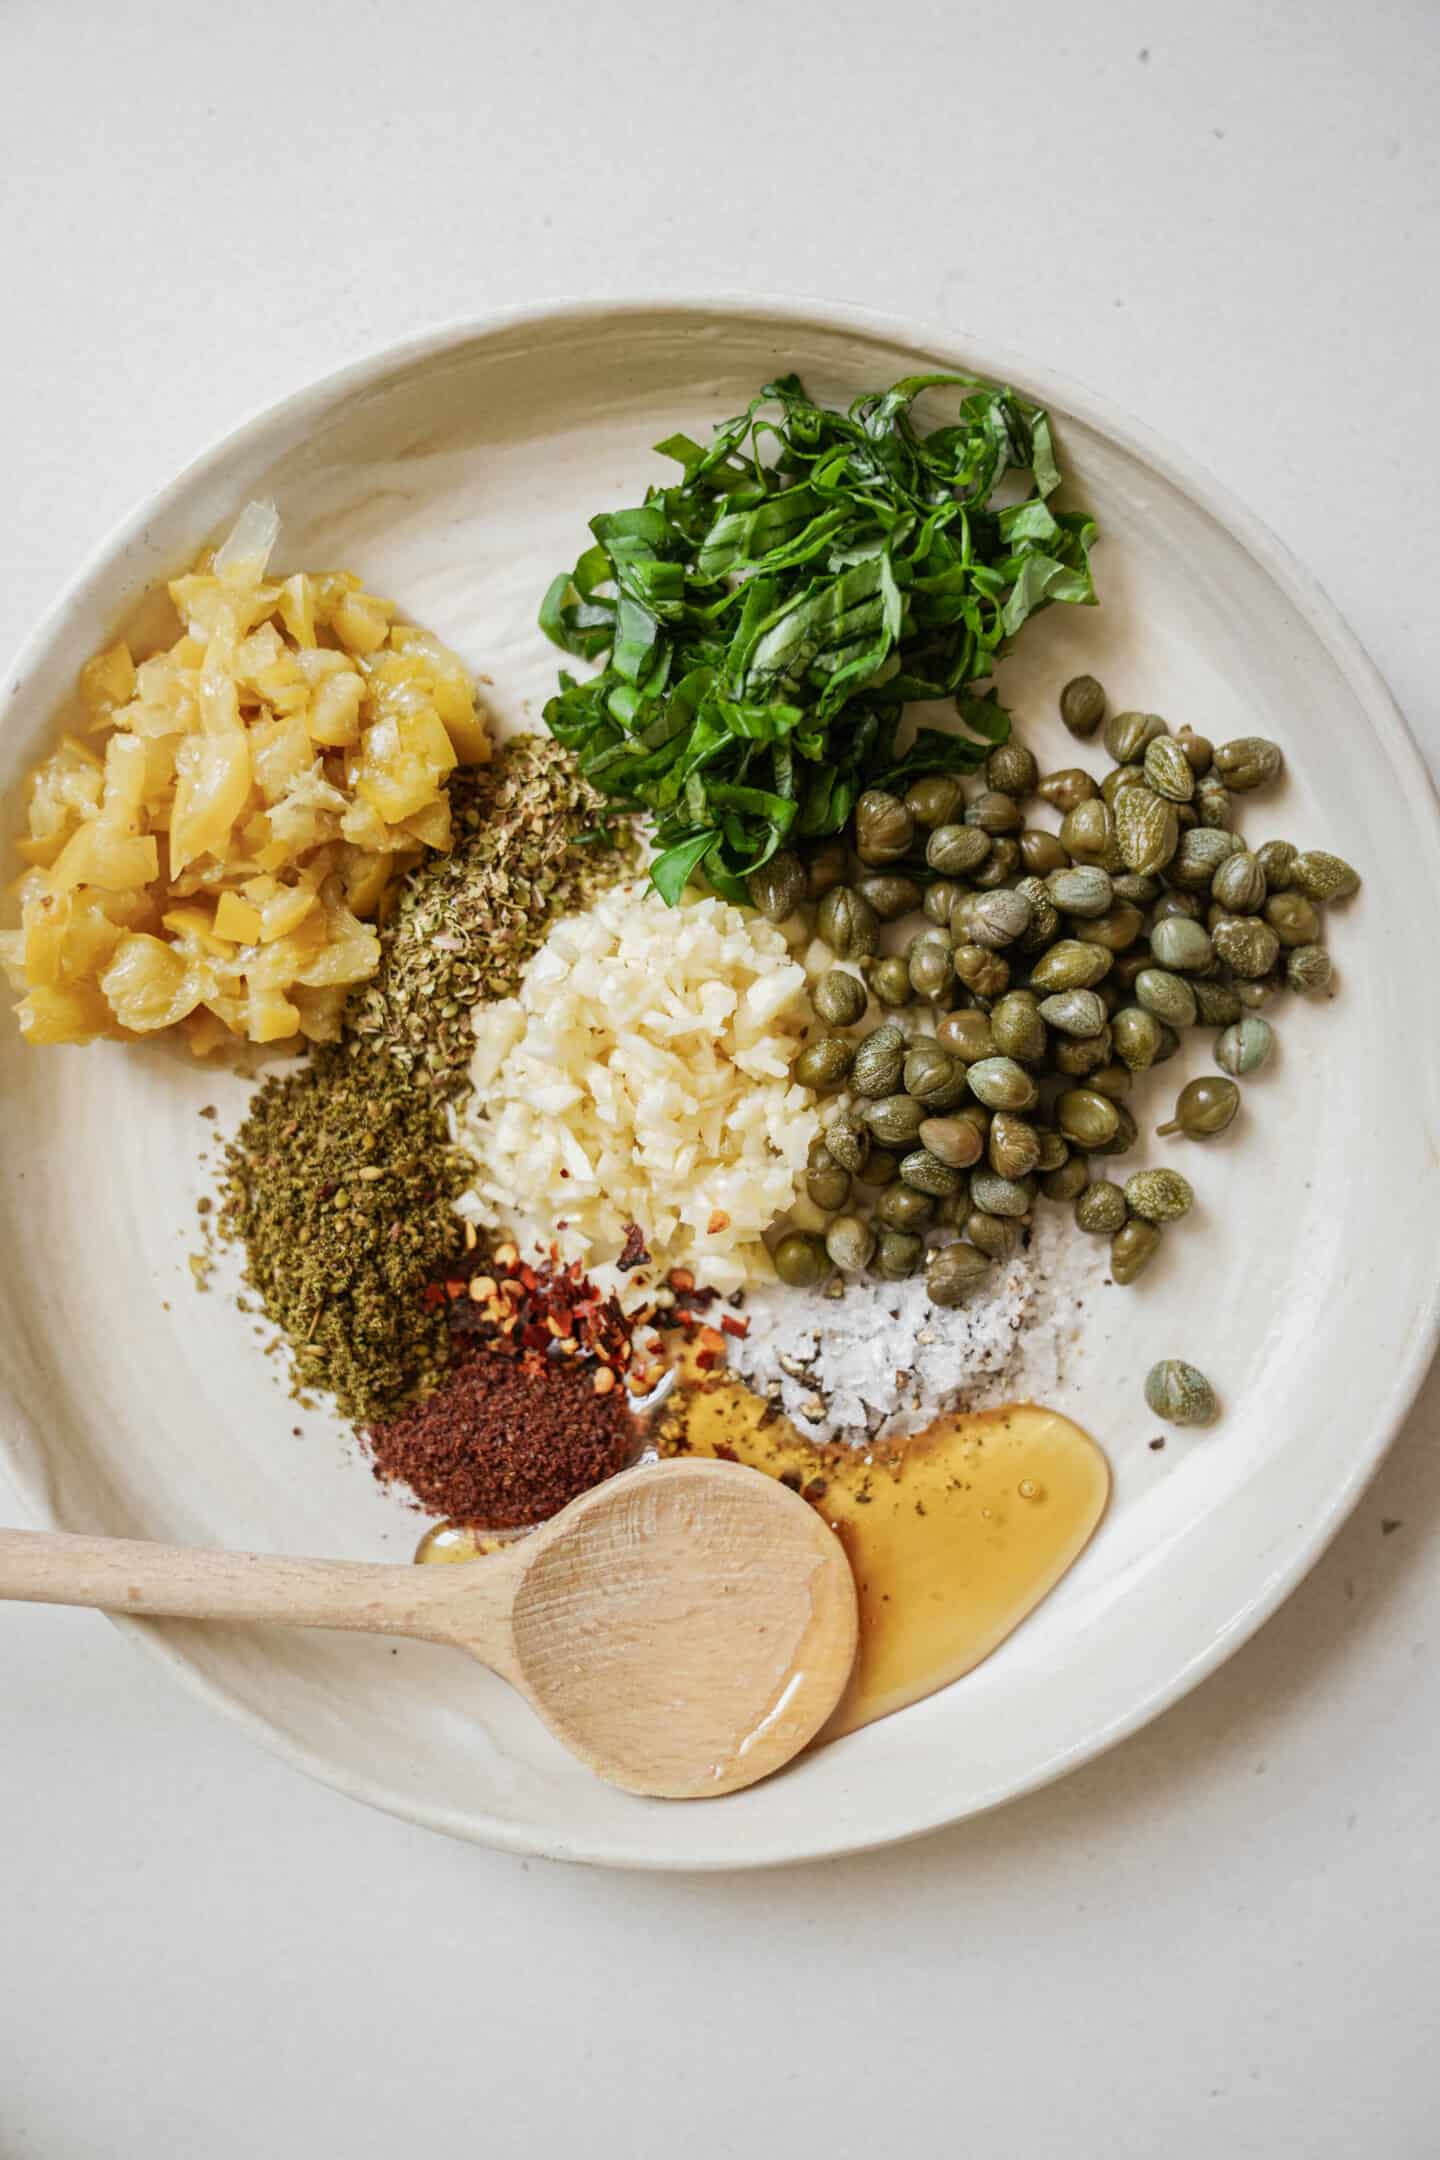 Ingredients laid out on a plate for bread dipping oil